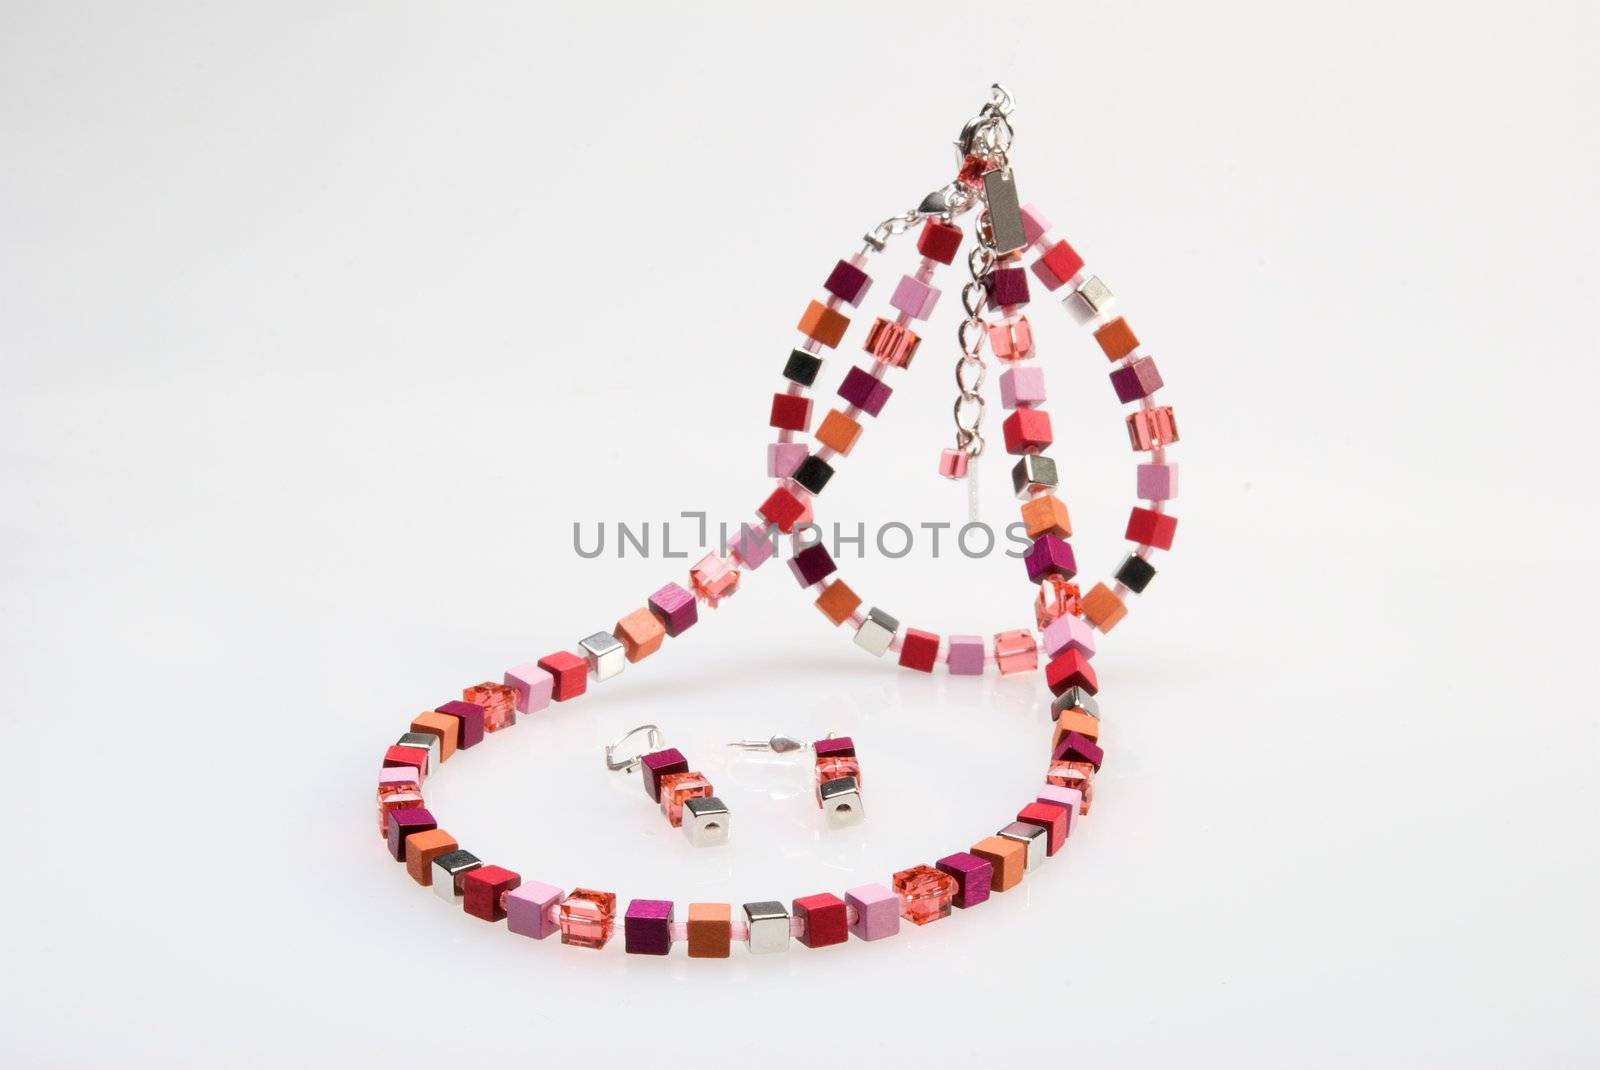 Colorful necklace, bracelet and earrings